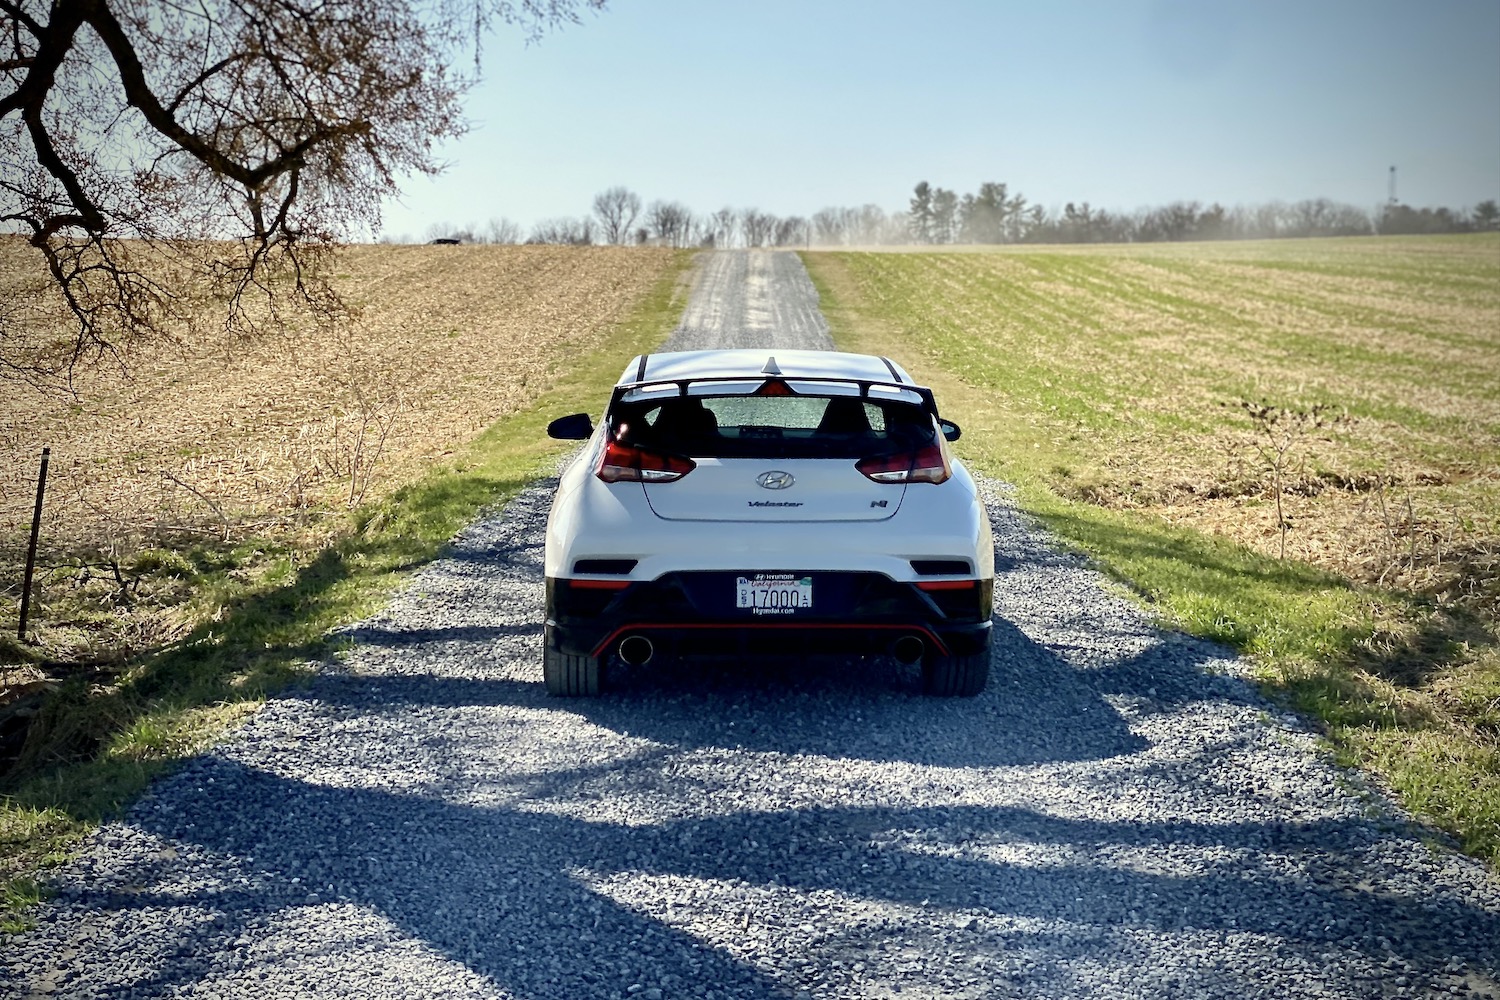 Hyundai Veloster N rear end on a gravel path in a field.